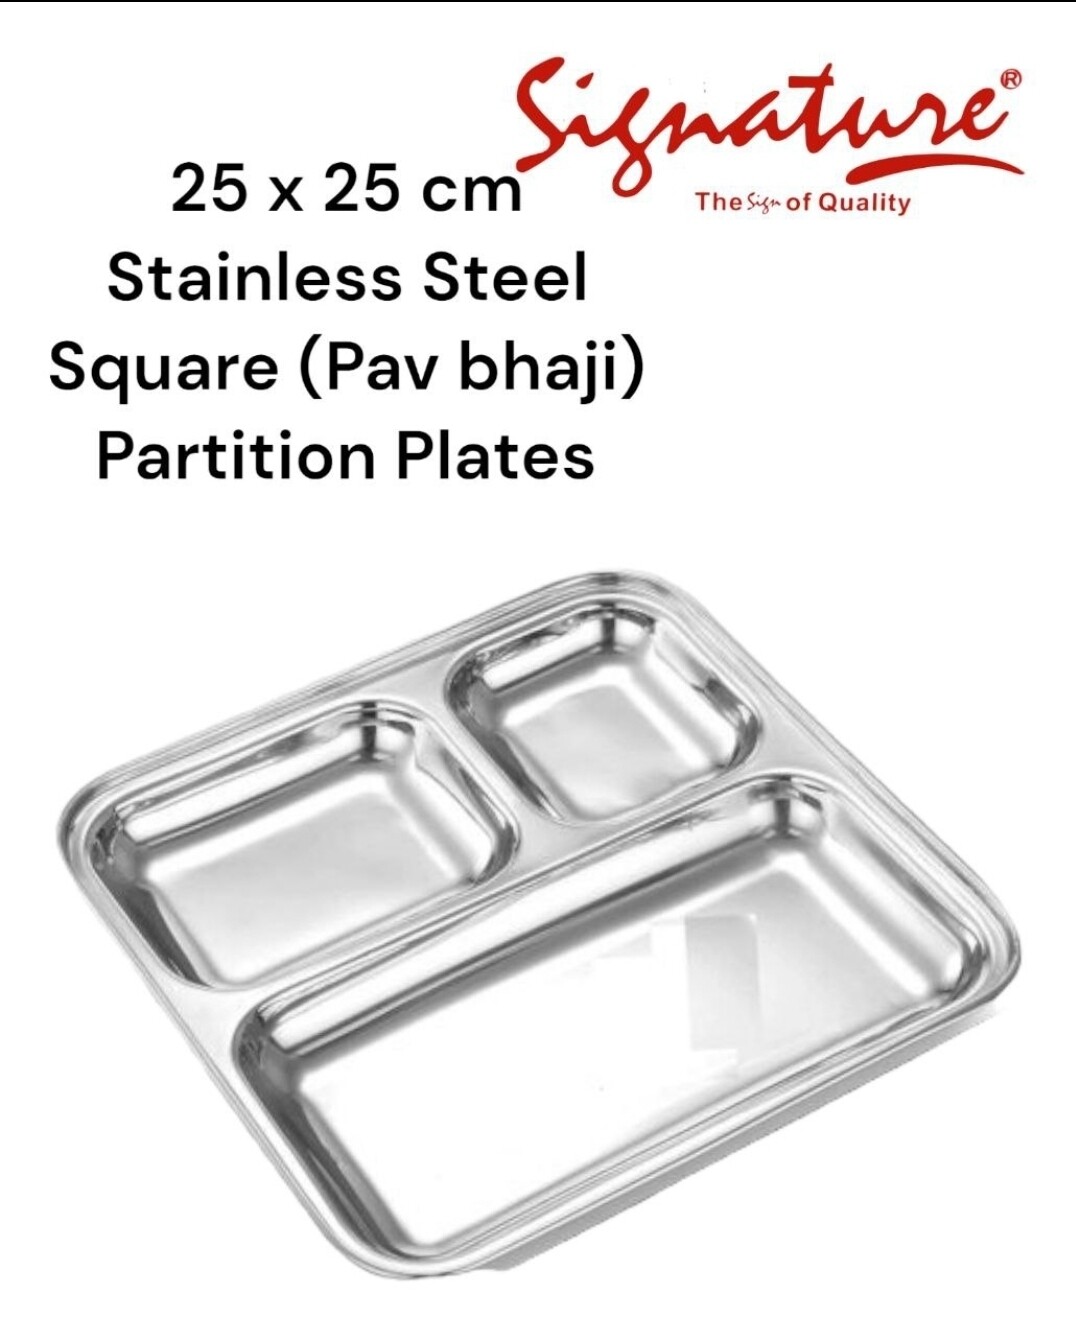 Signature stainless steel partition plate 25x25cm